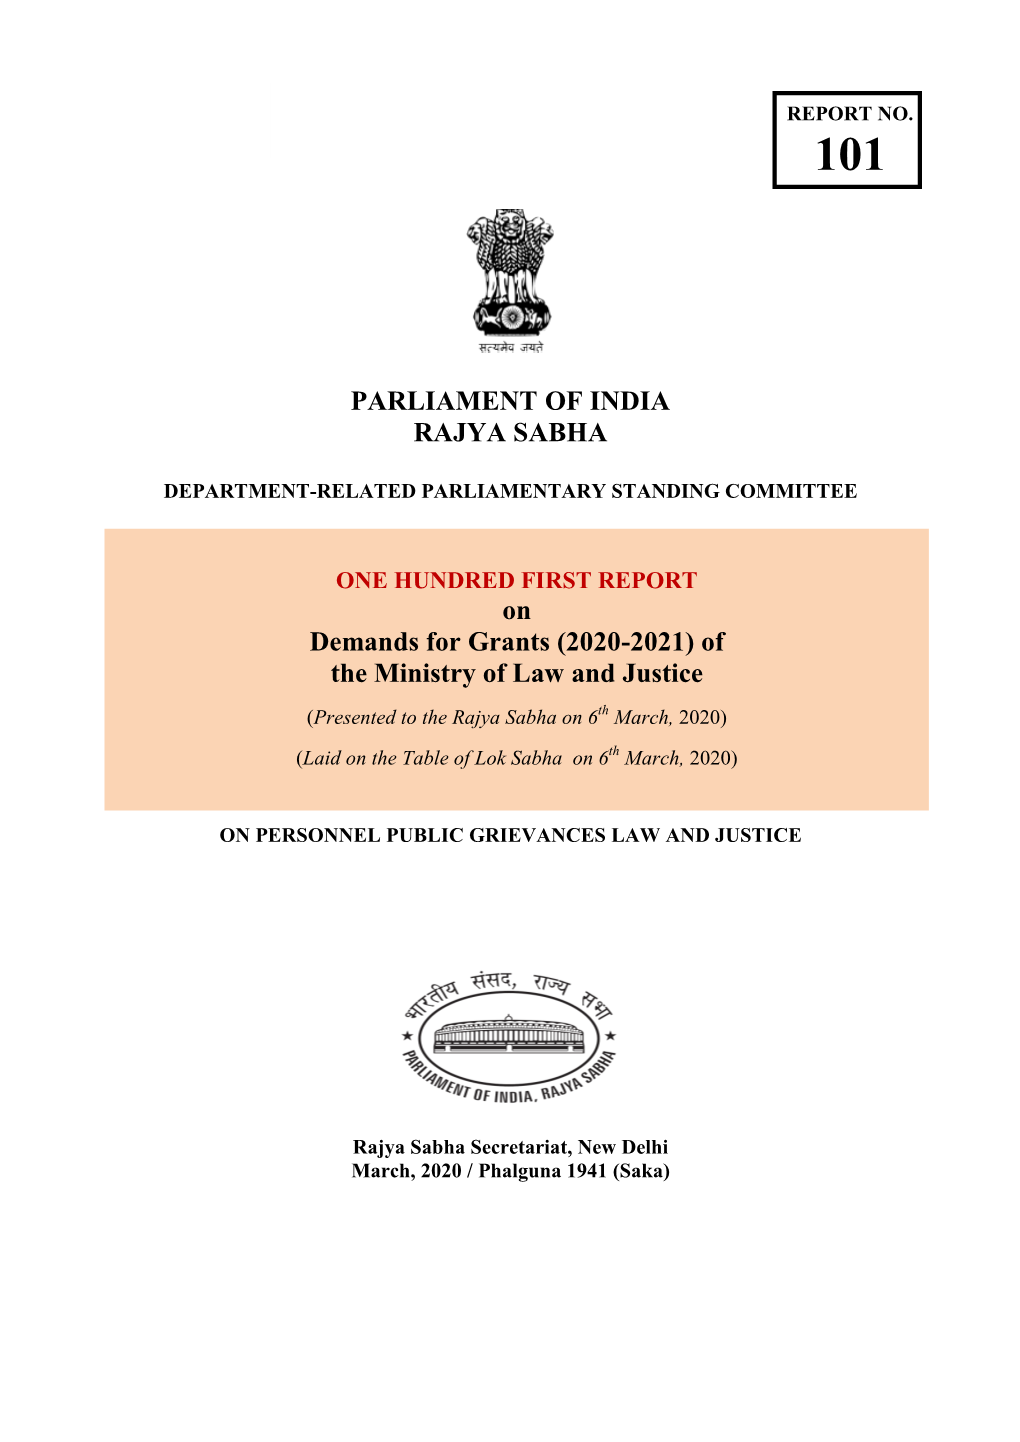 2020-2021) of the Ministry of Law and Justice (Presented to the Rajya Sabha on 6Th March, 2020) (Laid on the Table of Lok Sabha on 6Th March, 2020